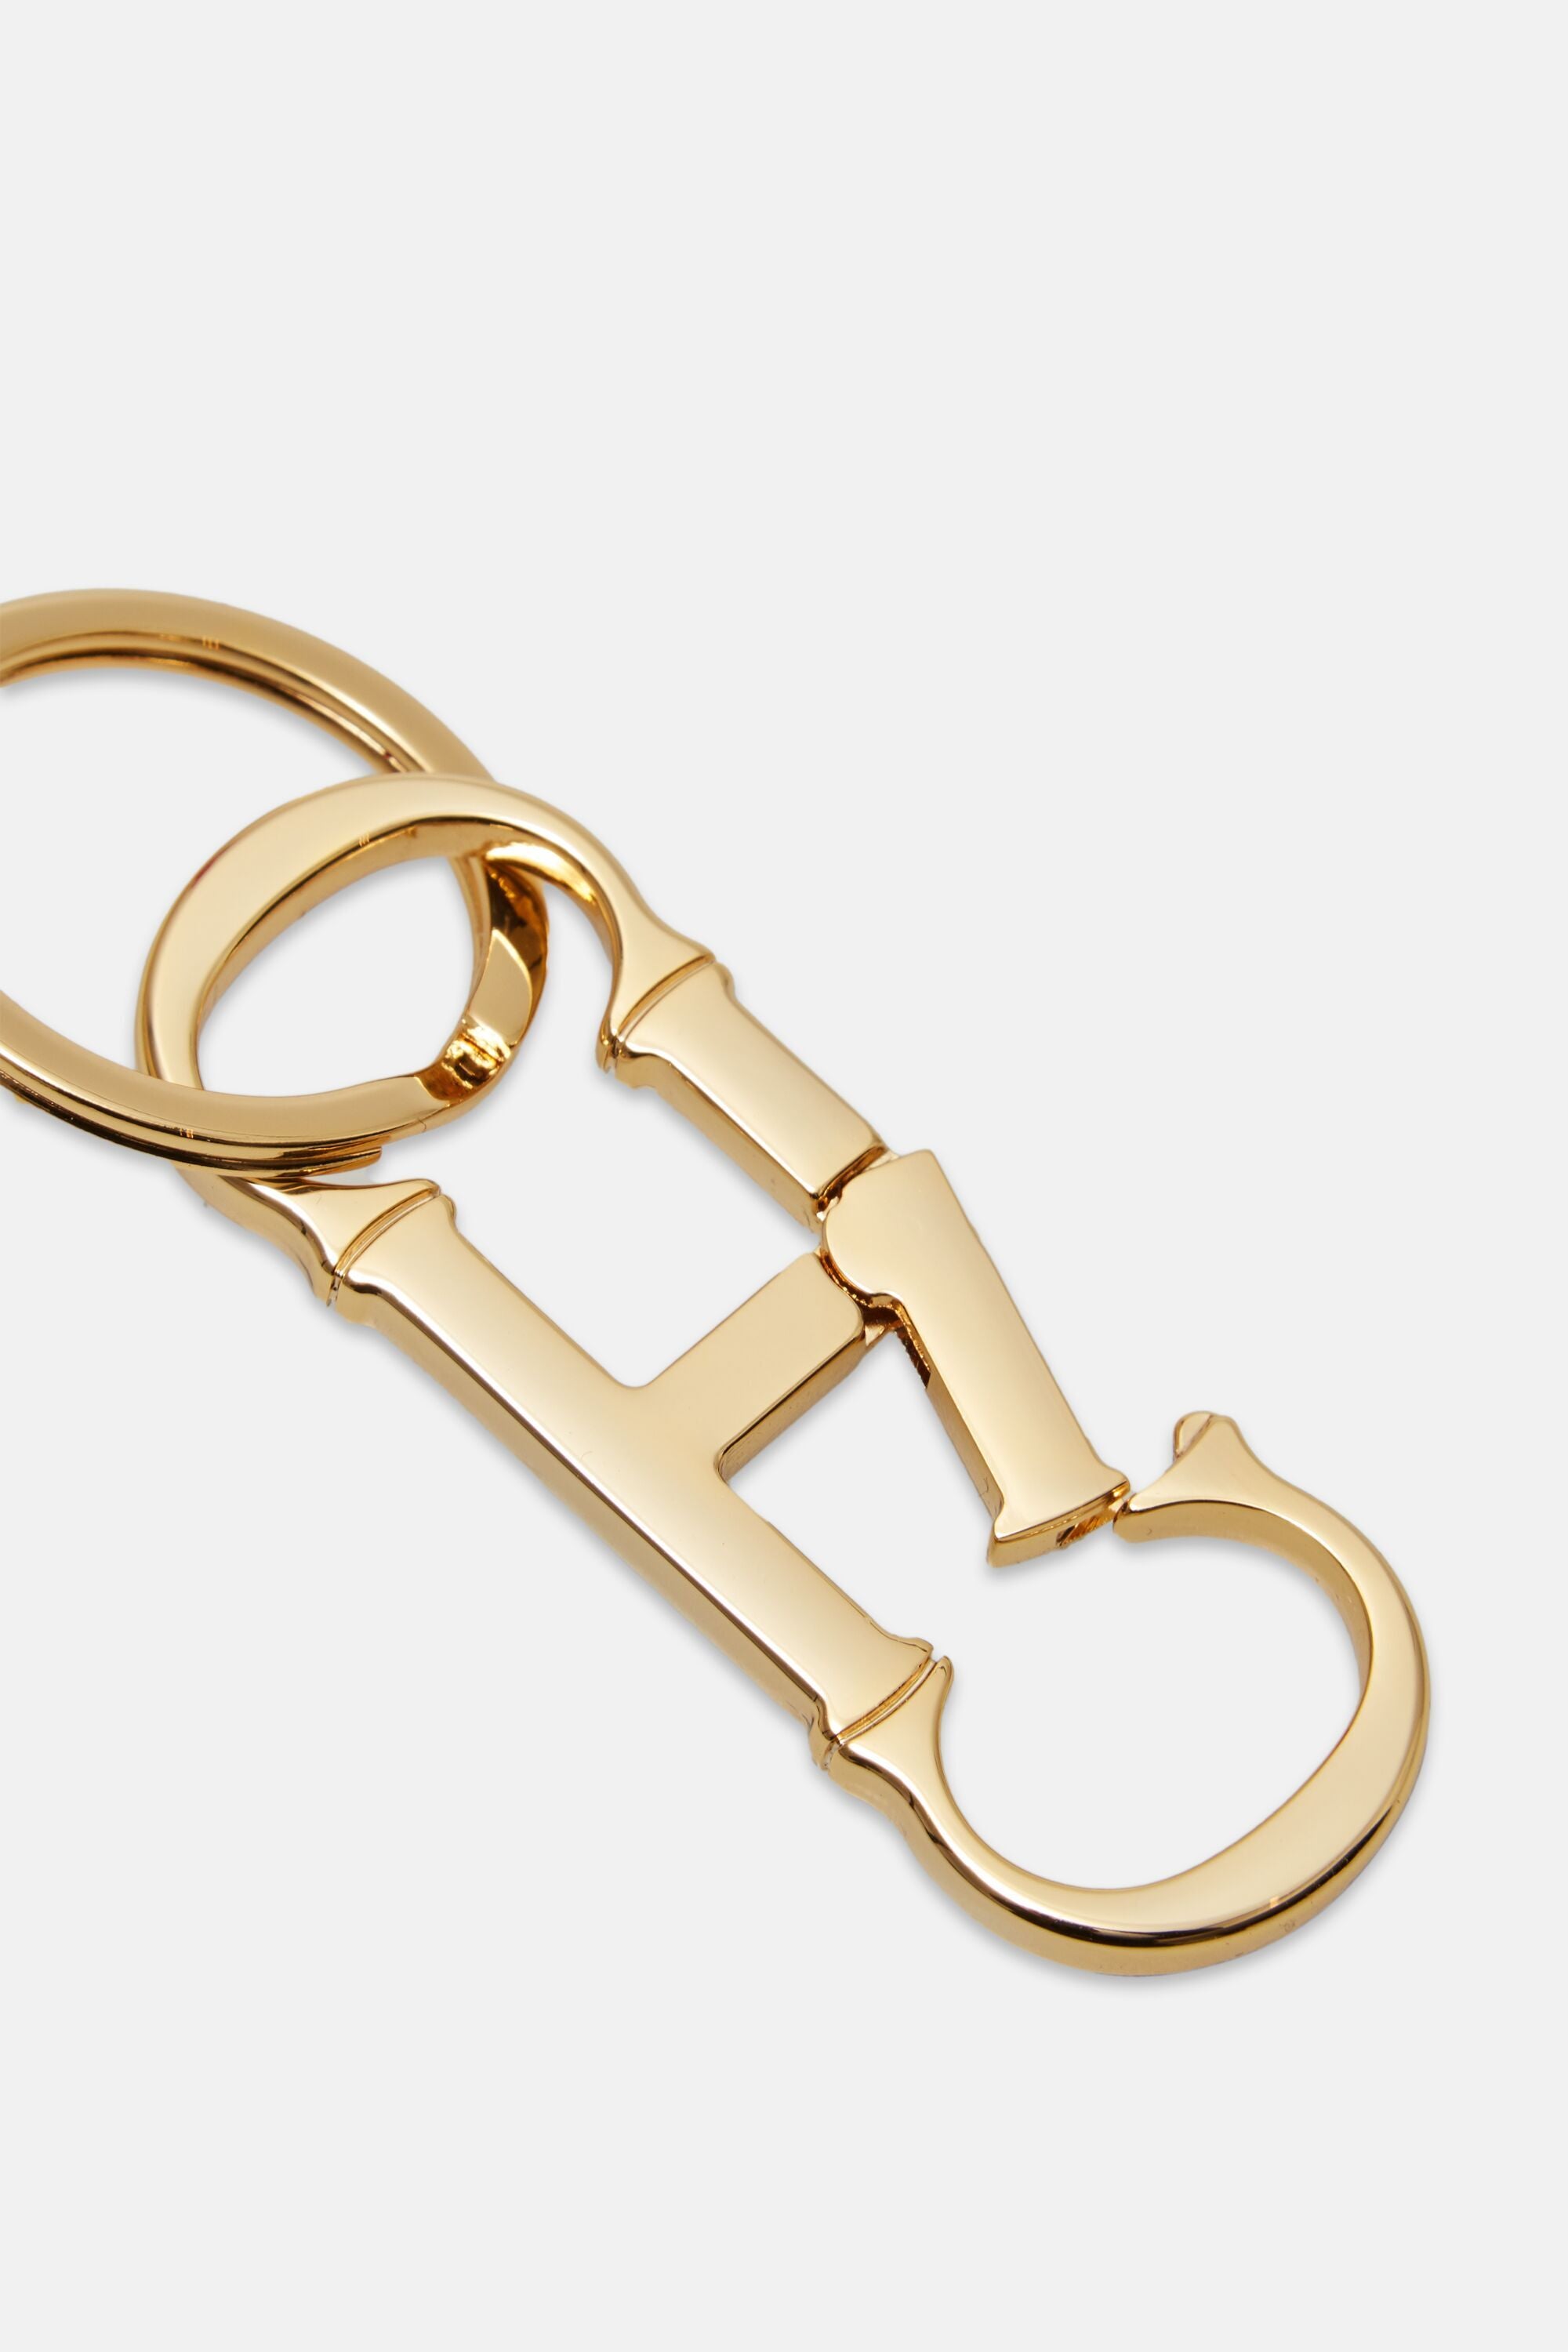 Personalized Initial Keychain – Buckle and Hide Leather LLC